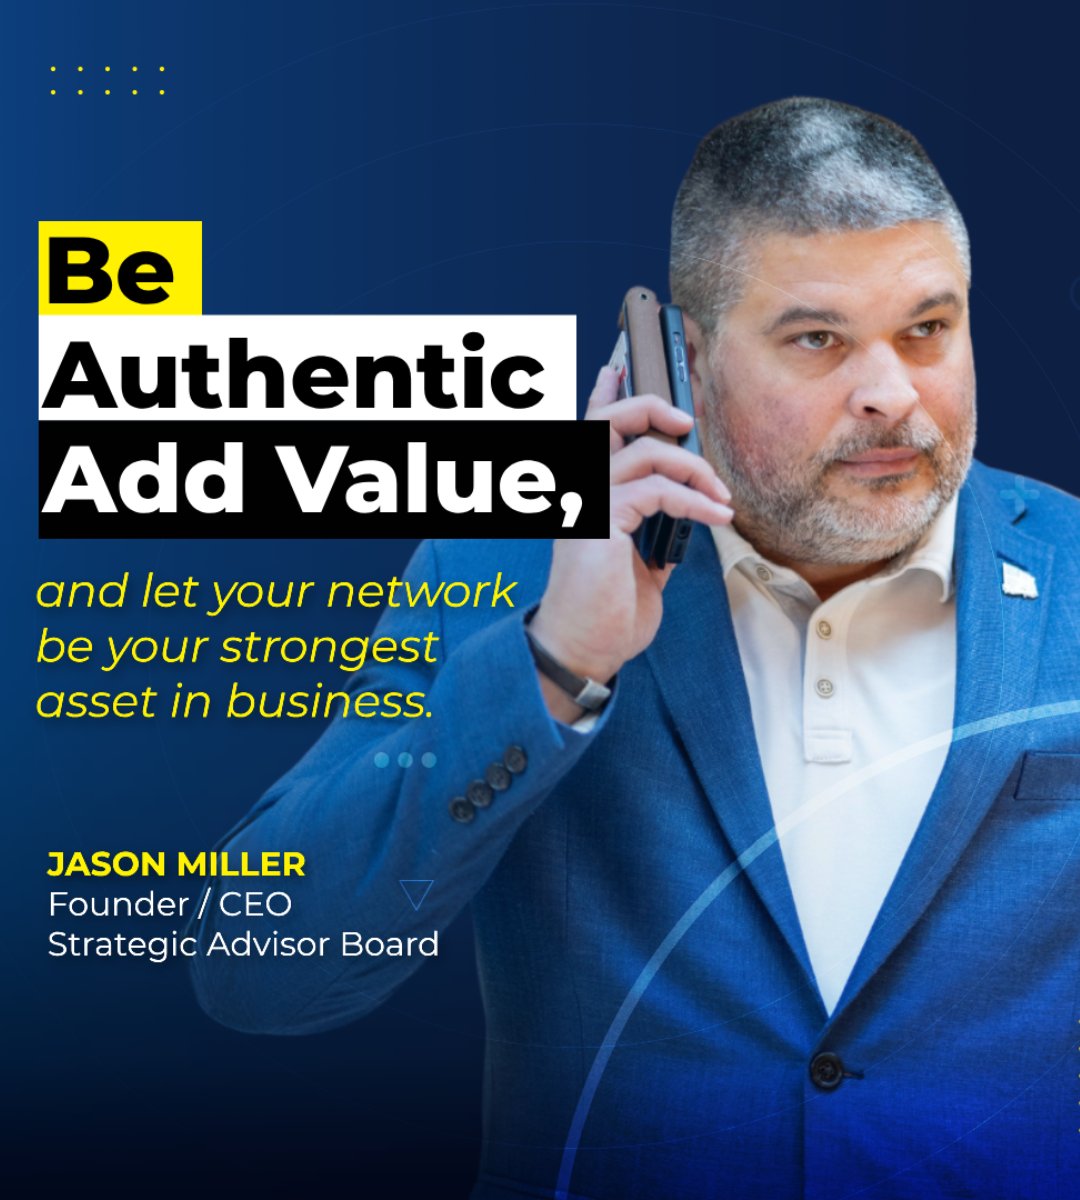 In the journey towards business excellence, let authenticity guide your actions, let value propel your endeavors, and let your network be your strongest asset. #NetworkingPower #BusinessNetworking #BusinessRelationships #AuthenticityMatters #AddingValue